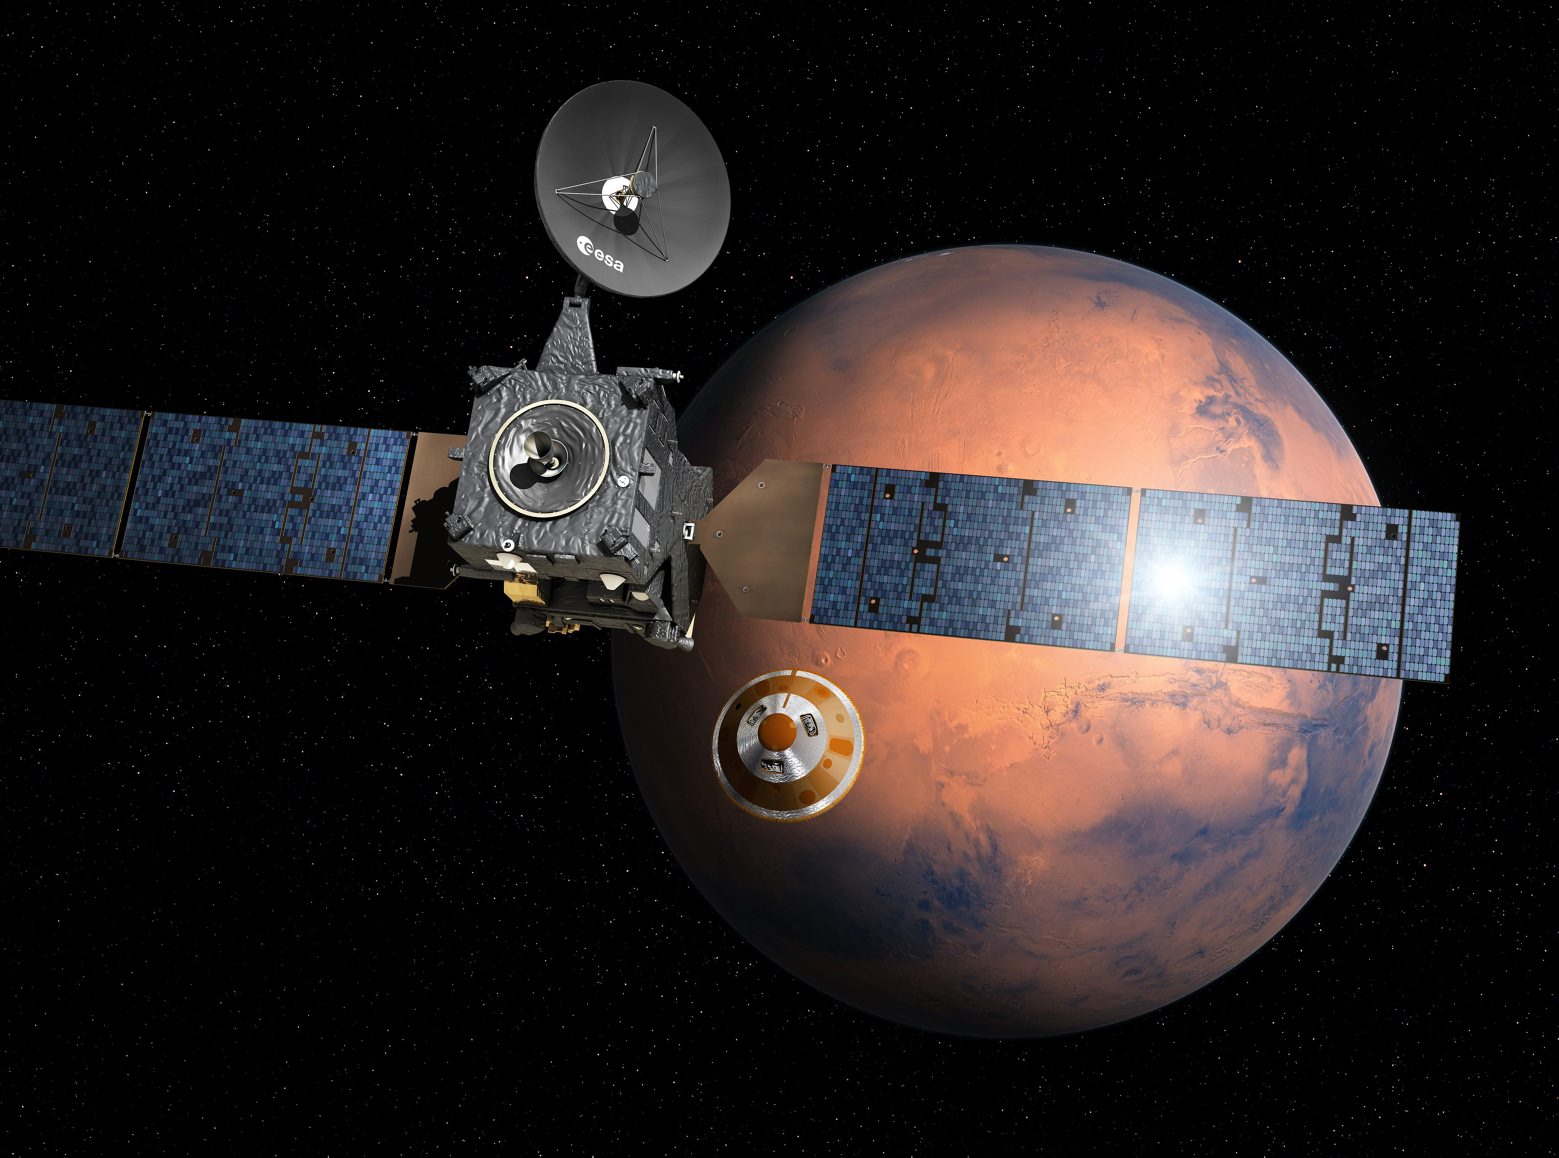 Artistís impression provided by the European Space Agency, ESA, depicting the separation of the ExoMars 2016 entry, descent and landing demonstrator module, named Schiaparelli, center, from the Trace Gas Orbiter, TGO, left, and heading for Mars. The separation was scheduled to occur on Sunday, Oct. 16, about seven months after launch. Schiaparelli is set to enter the martian atmosphere on Wednesday, Oct. 19, 2016 while TGO will enter orbit around Mars. The probe will take images of Mars and conduct scientific measurements on the surface, but its main purpose is to test technology for a future European Mars rover.  Schiaparelli's mother ship will remain in orbit to analyze gases in the Martian atmosphere to help answer whether there is or was life on Mars.  (ESA/D. Ducros via AP) Europe Mars Mission